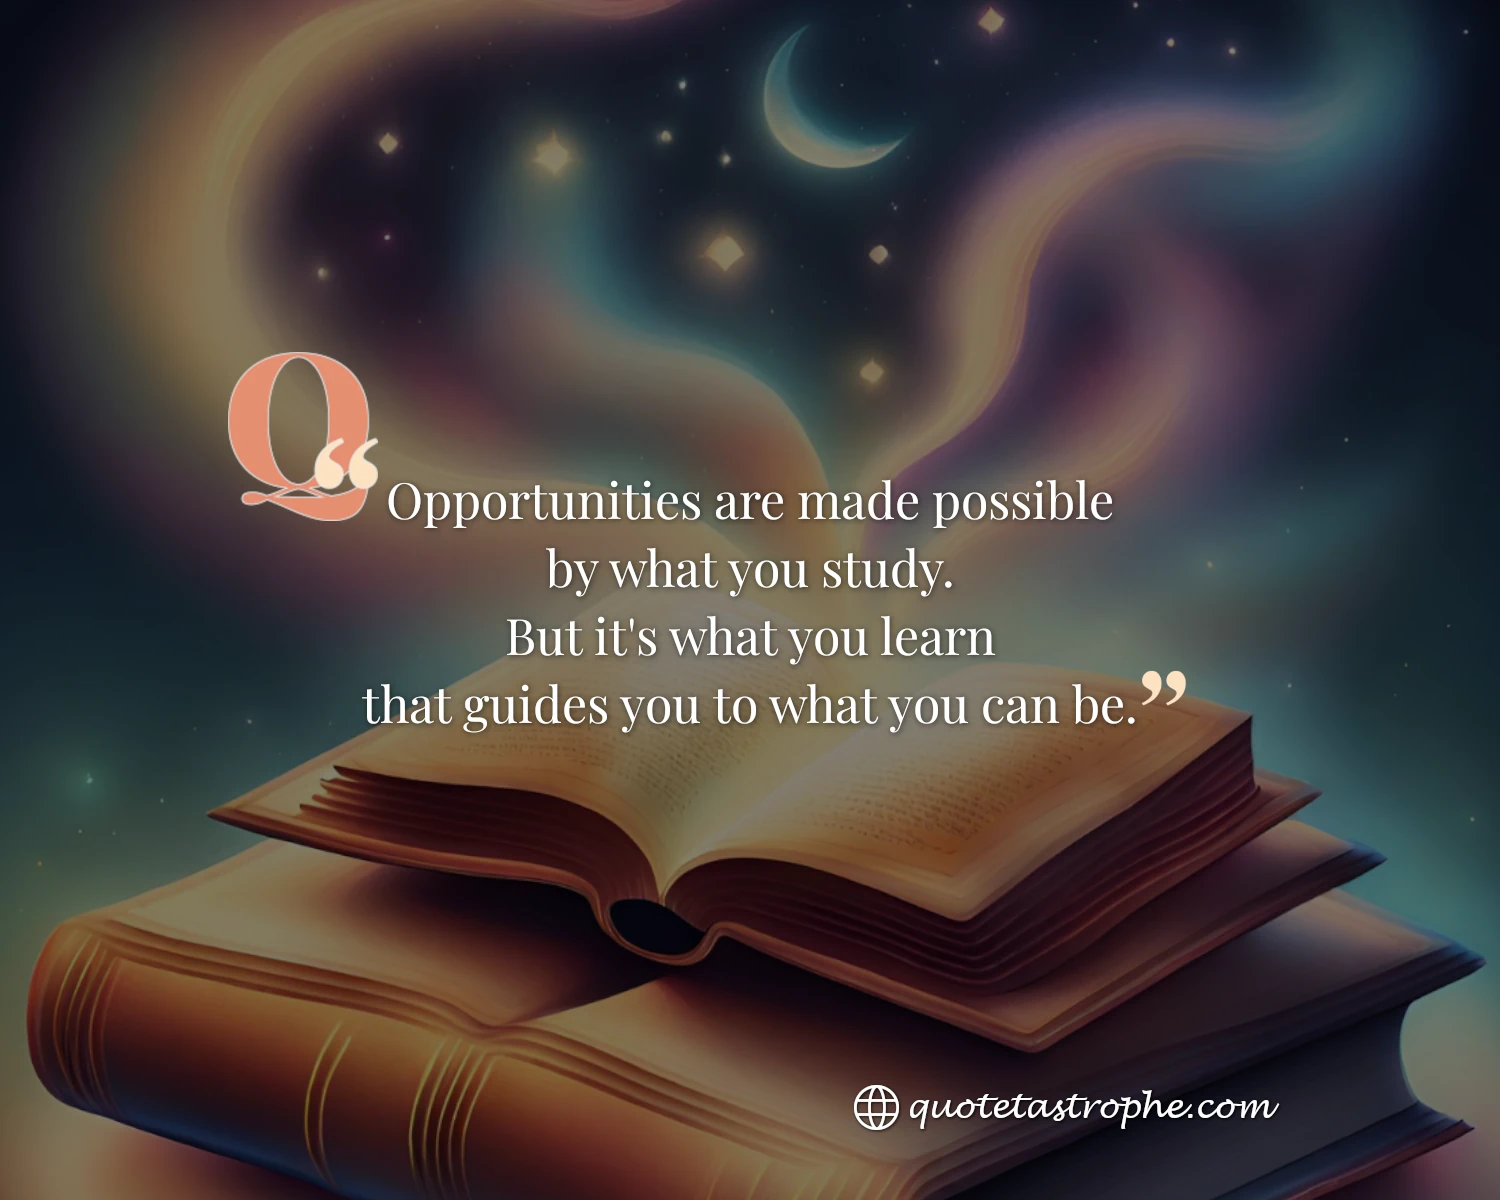 Opportunities are Made Possible by What You Study